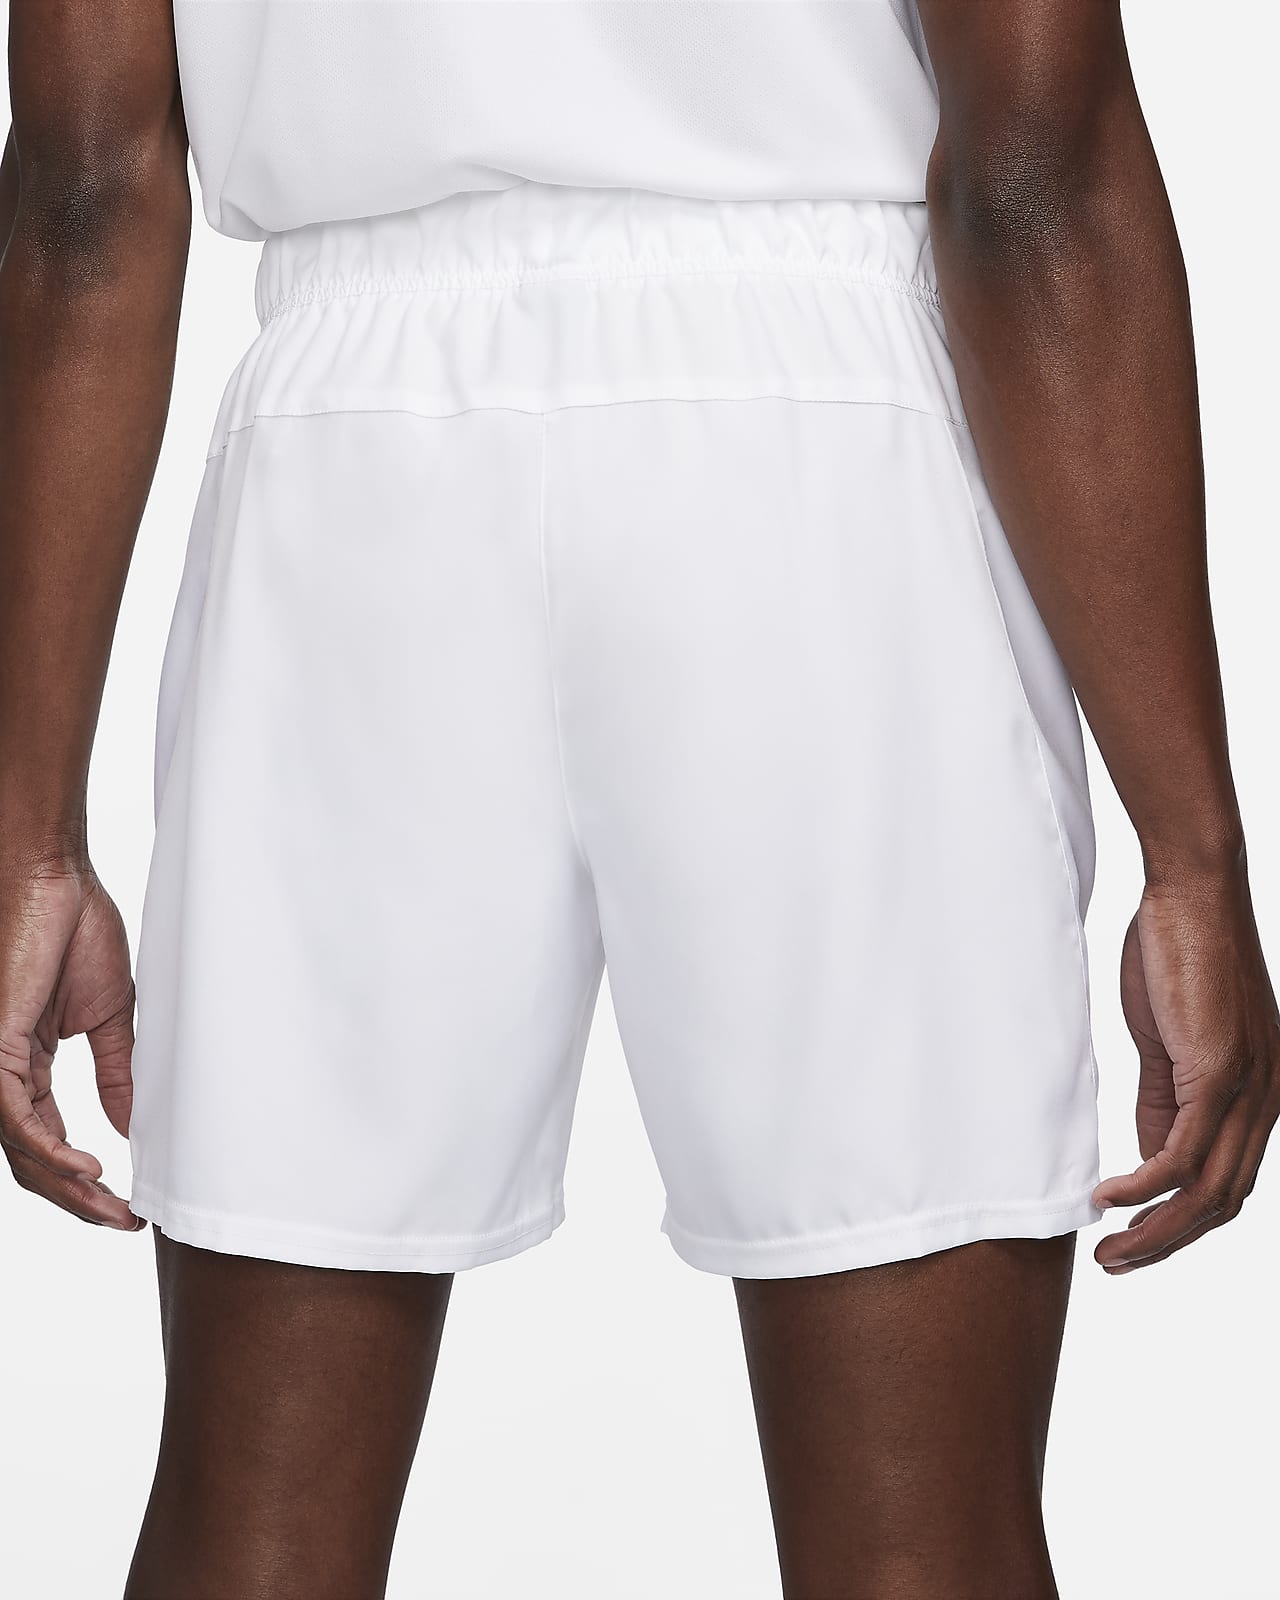 Nike Dri-Fit Tennis Shorts Mens Size XL White Active Wear Outdoors 455618  New